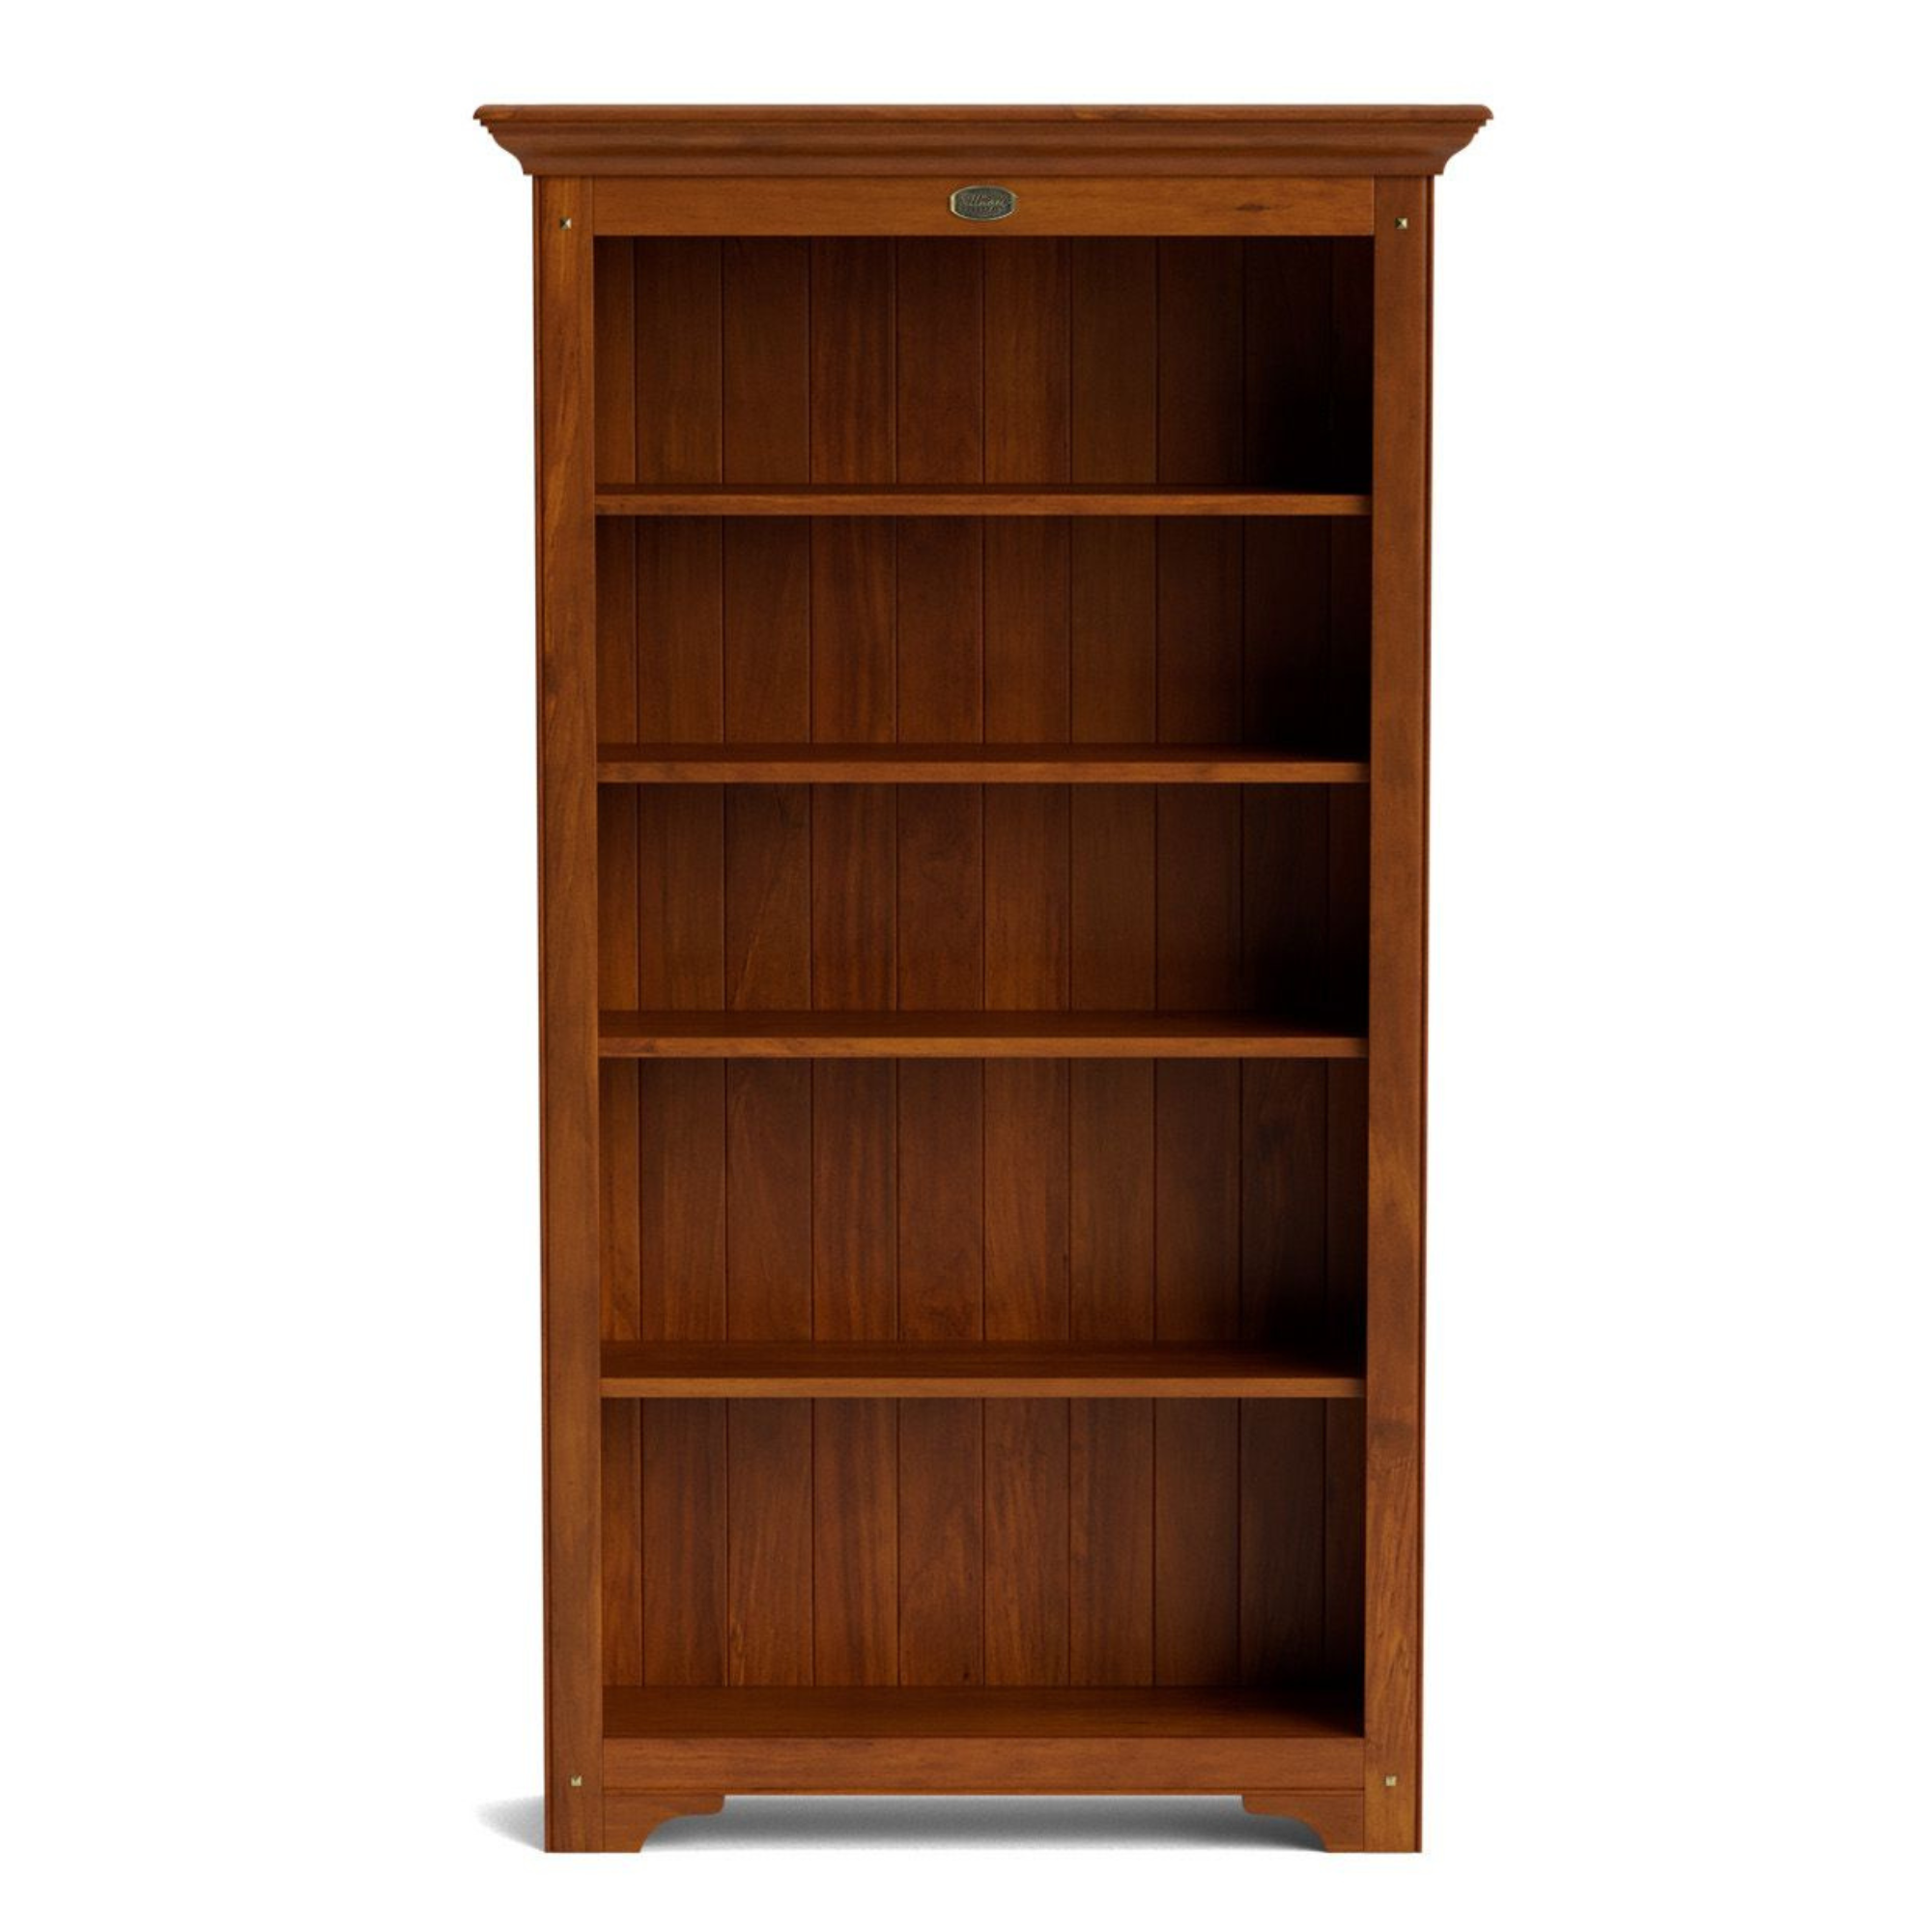 VILLAGER BOOKCASES | 4 SIZES | NZ MADE